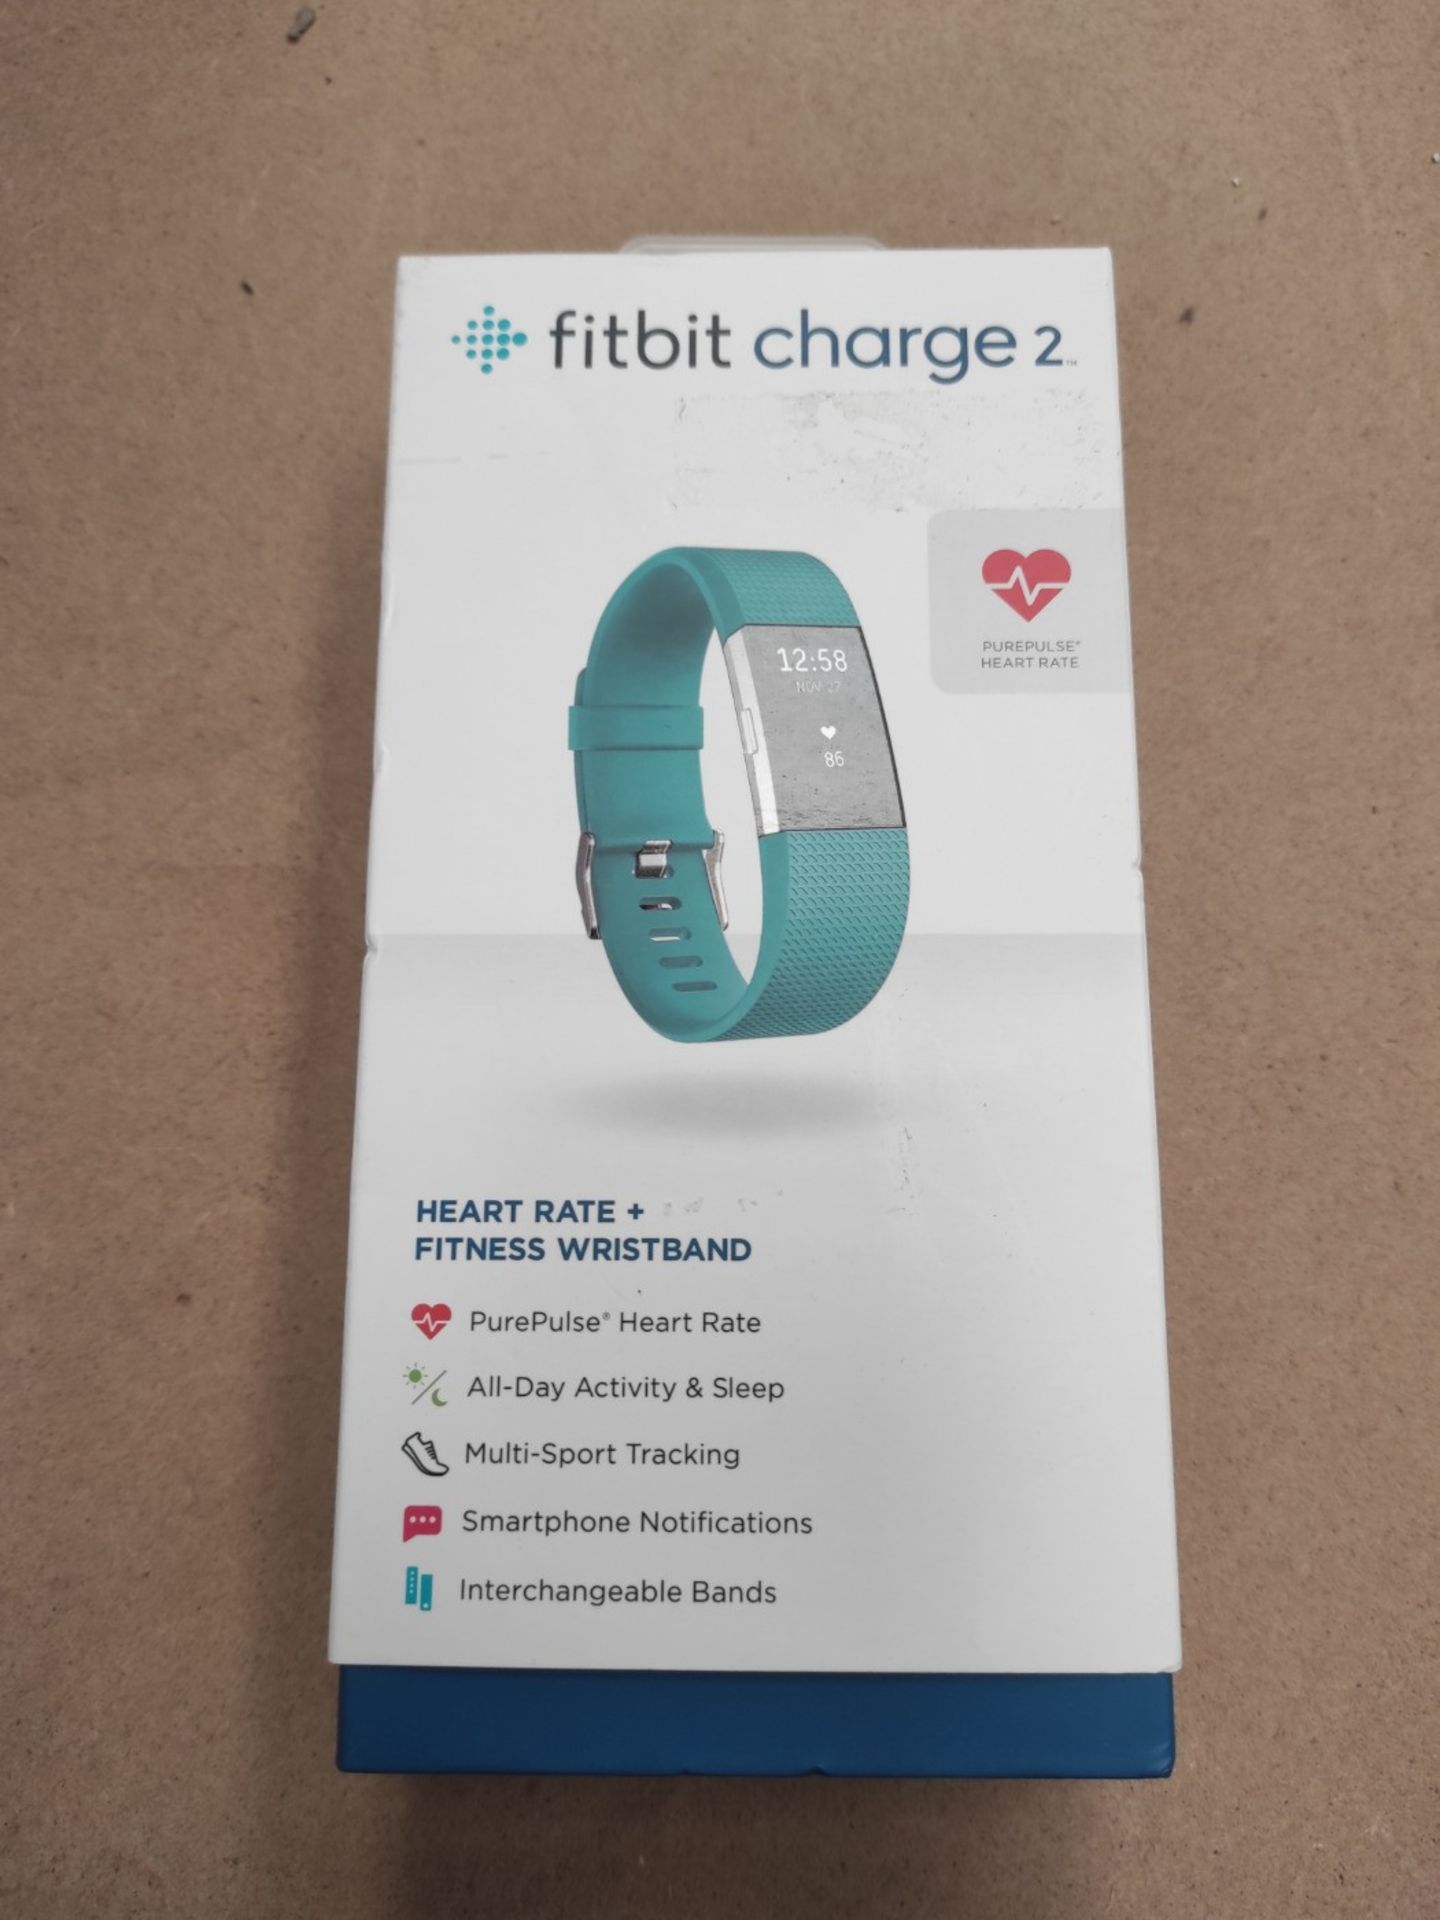 RRP £115.00 [CRACKED] Fitbit Charge 2 Activity Tracker with Wrist Based Heart Rate Monitor - Teal - Image 2 of 3